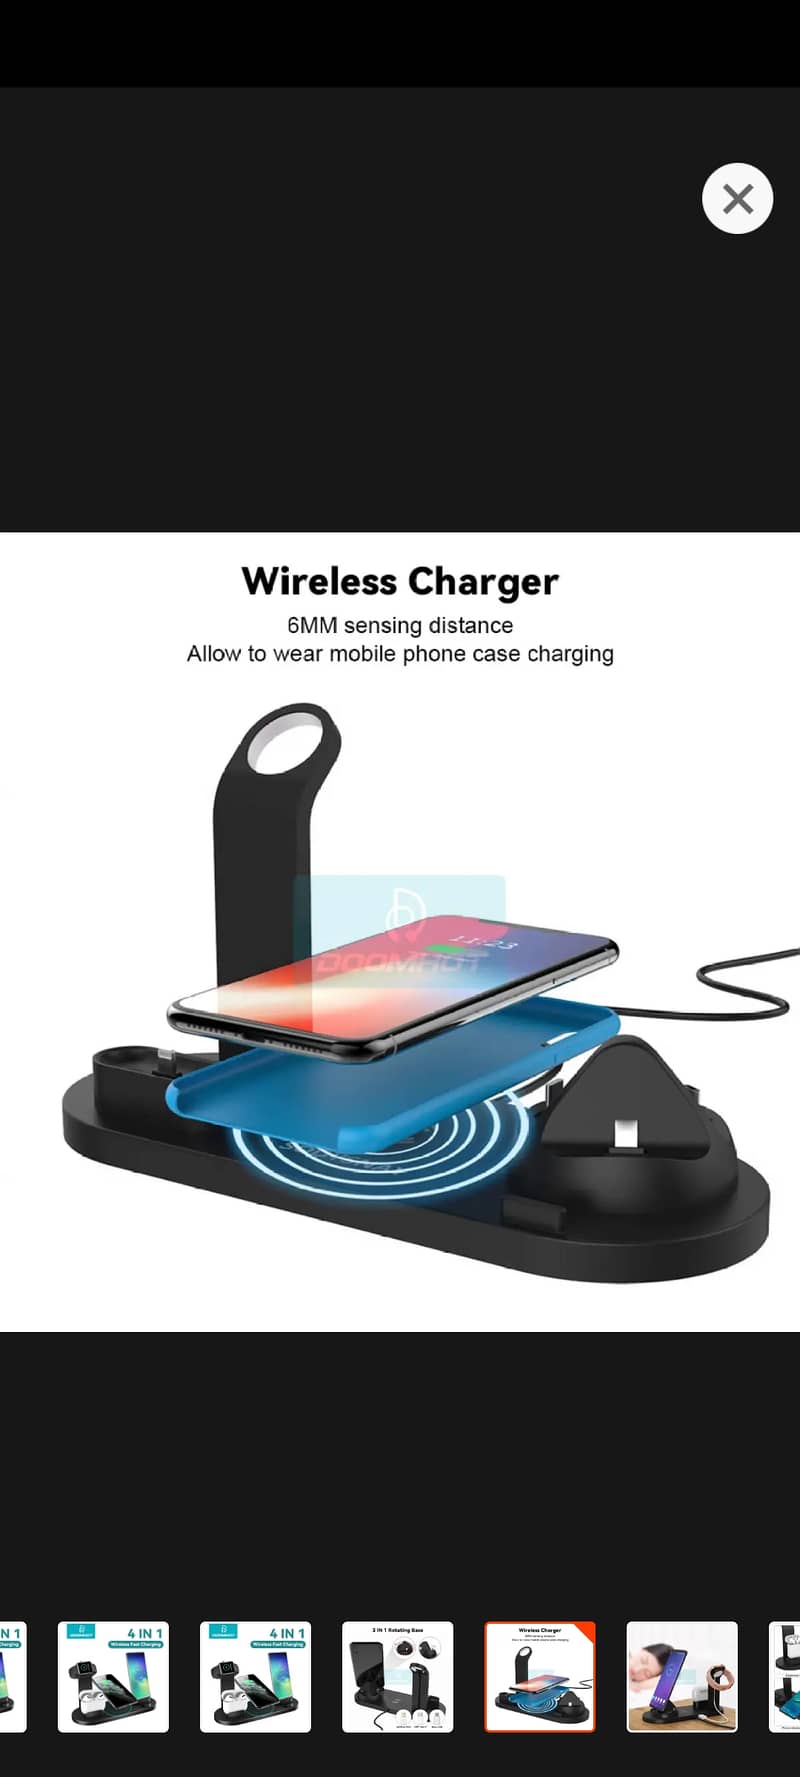 multifunctional 4 in one charging stand,also wireless charging support 3